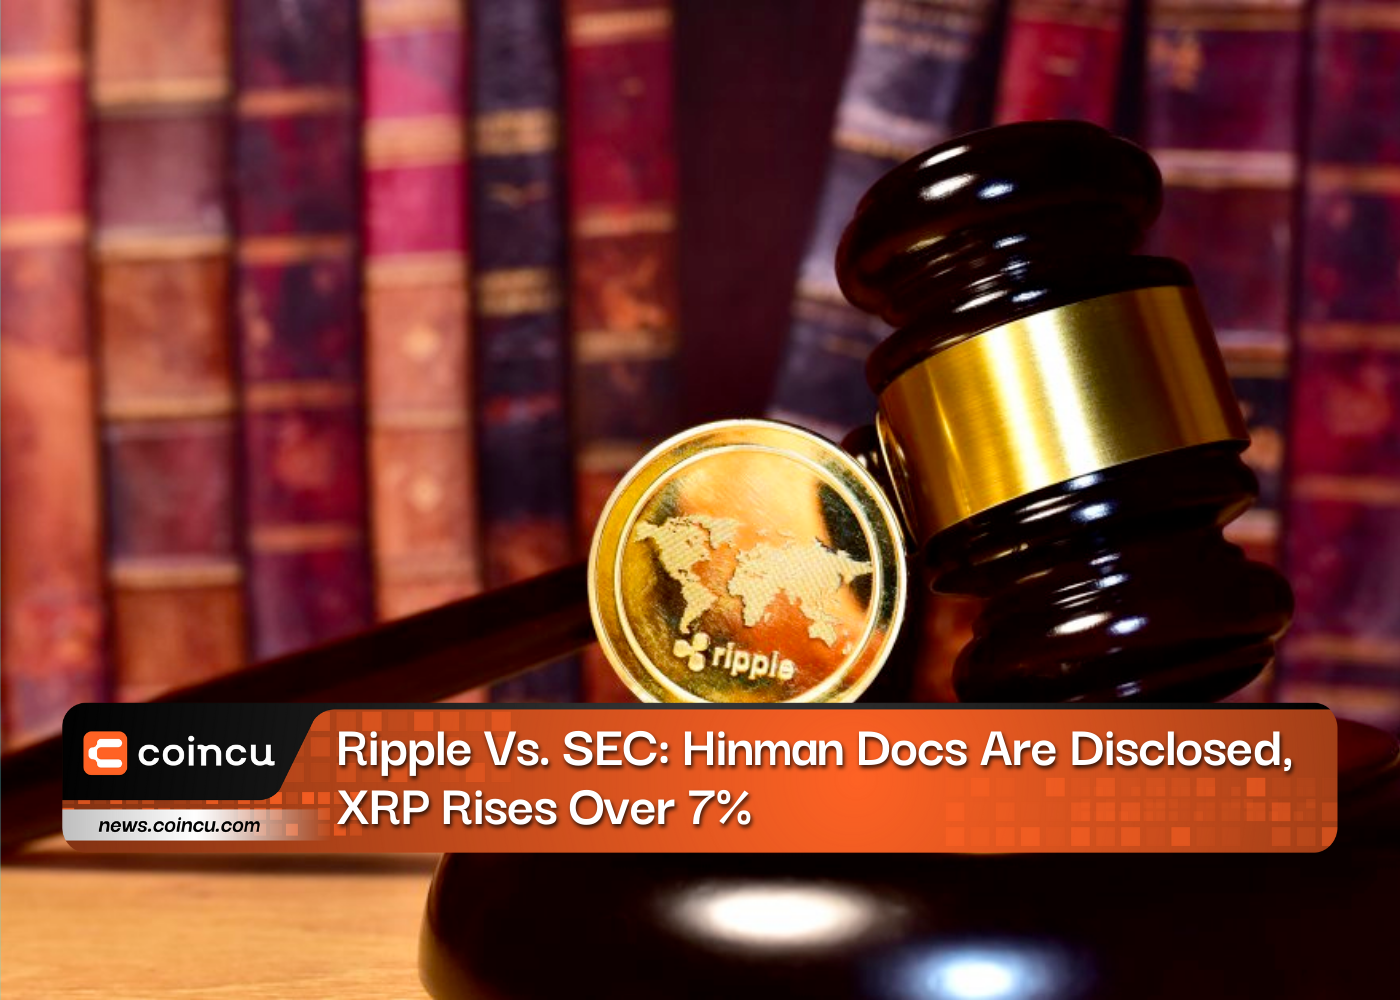 Ripple Lawsuit's Hinman Docs Are Disclosed, XRP Rises Over 7%